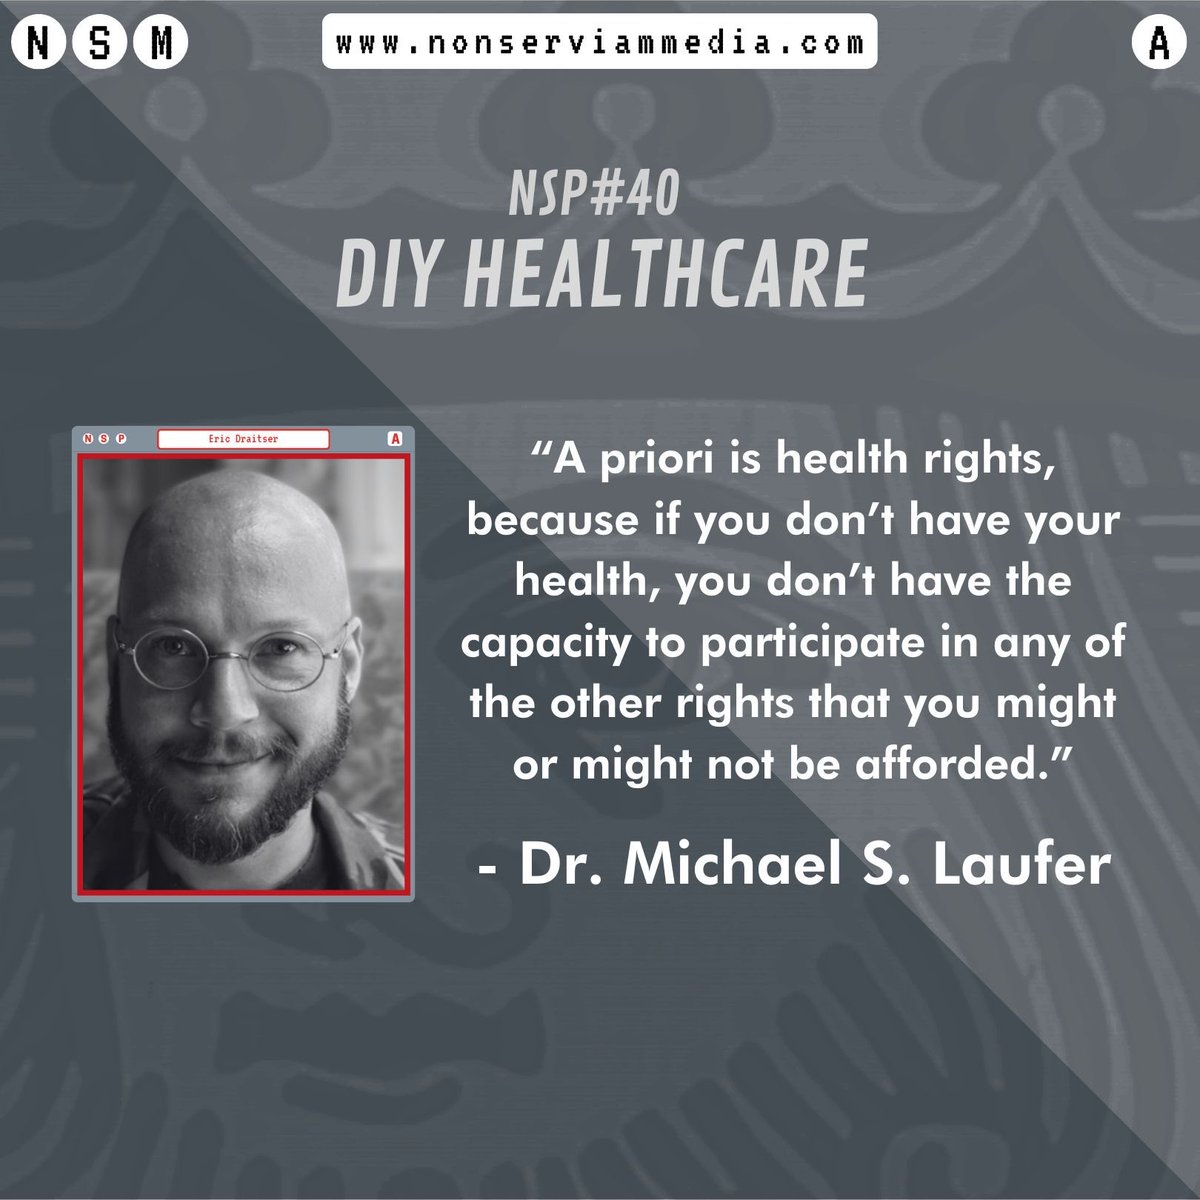 Dr. @MichaelSLaufer on why #HealthRights are fundamental for #HumanRights 

👉 soundcloud.com/nonserviammedi…

#NonServiamMedia #anarchism #healthcare #diy #medicine #reproductiverights #abortion